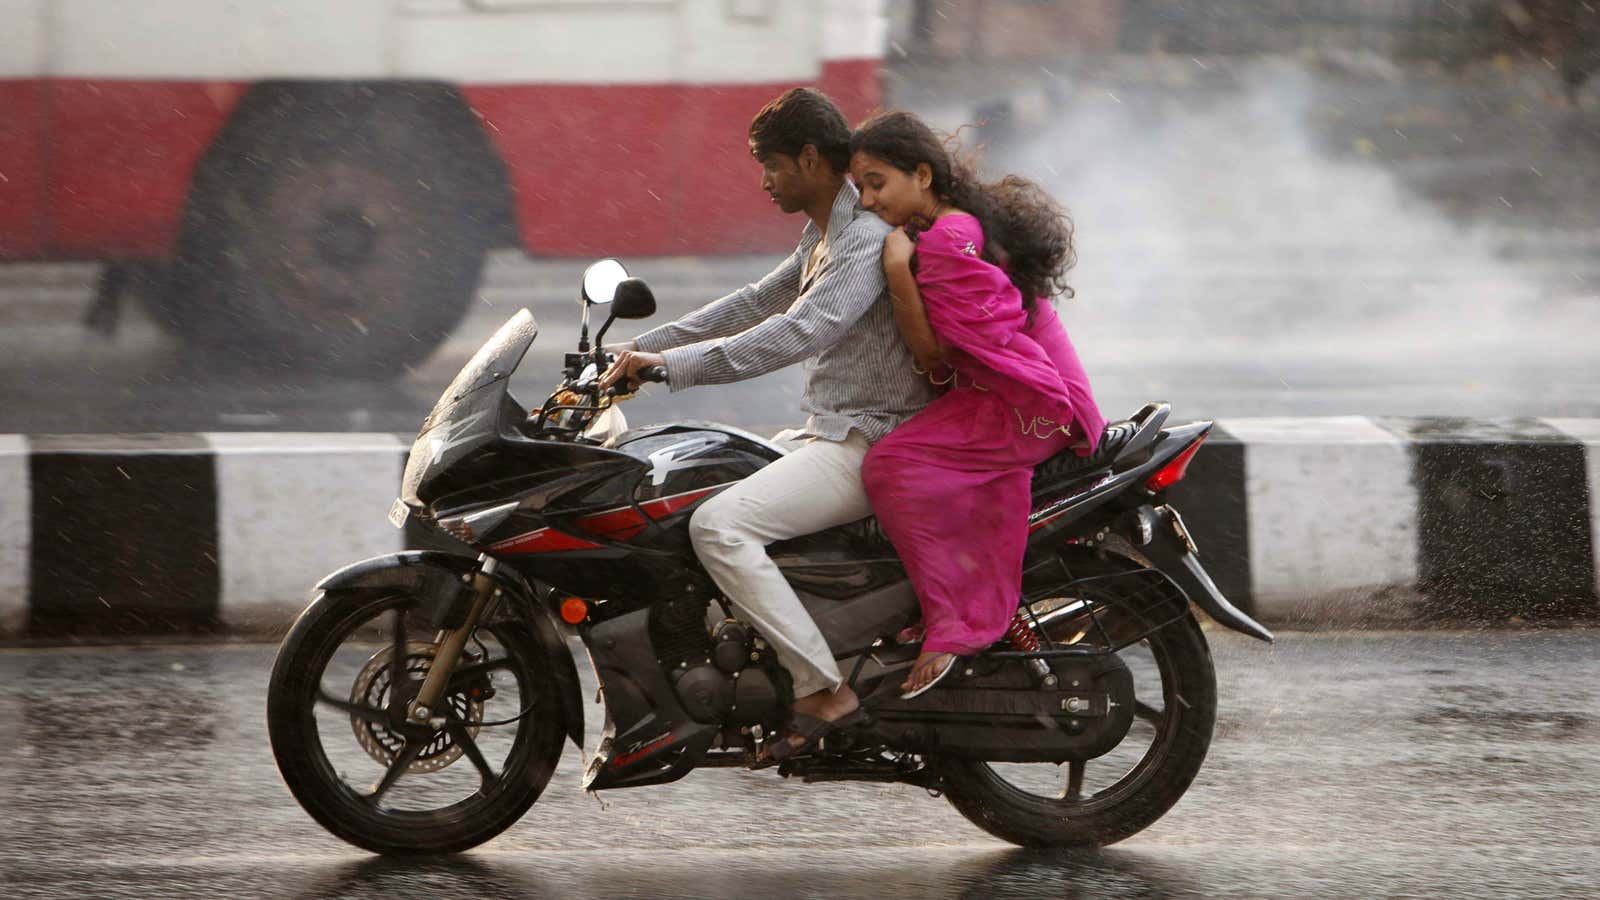 Indians are now racing off to find marriage online.